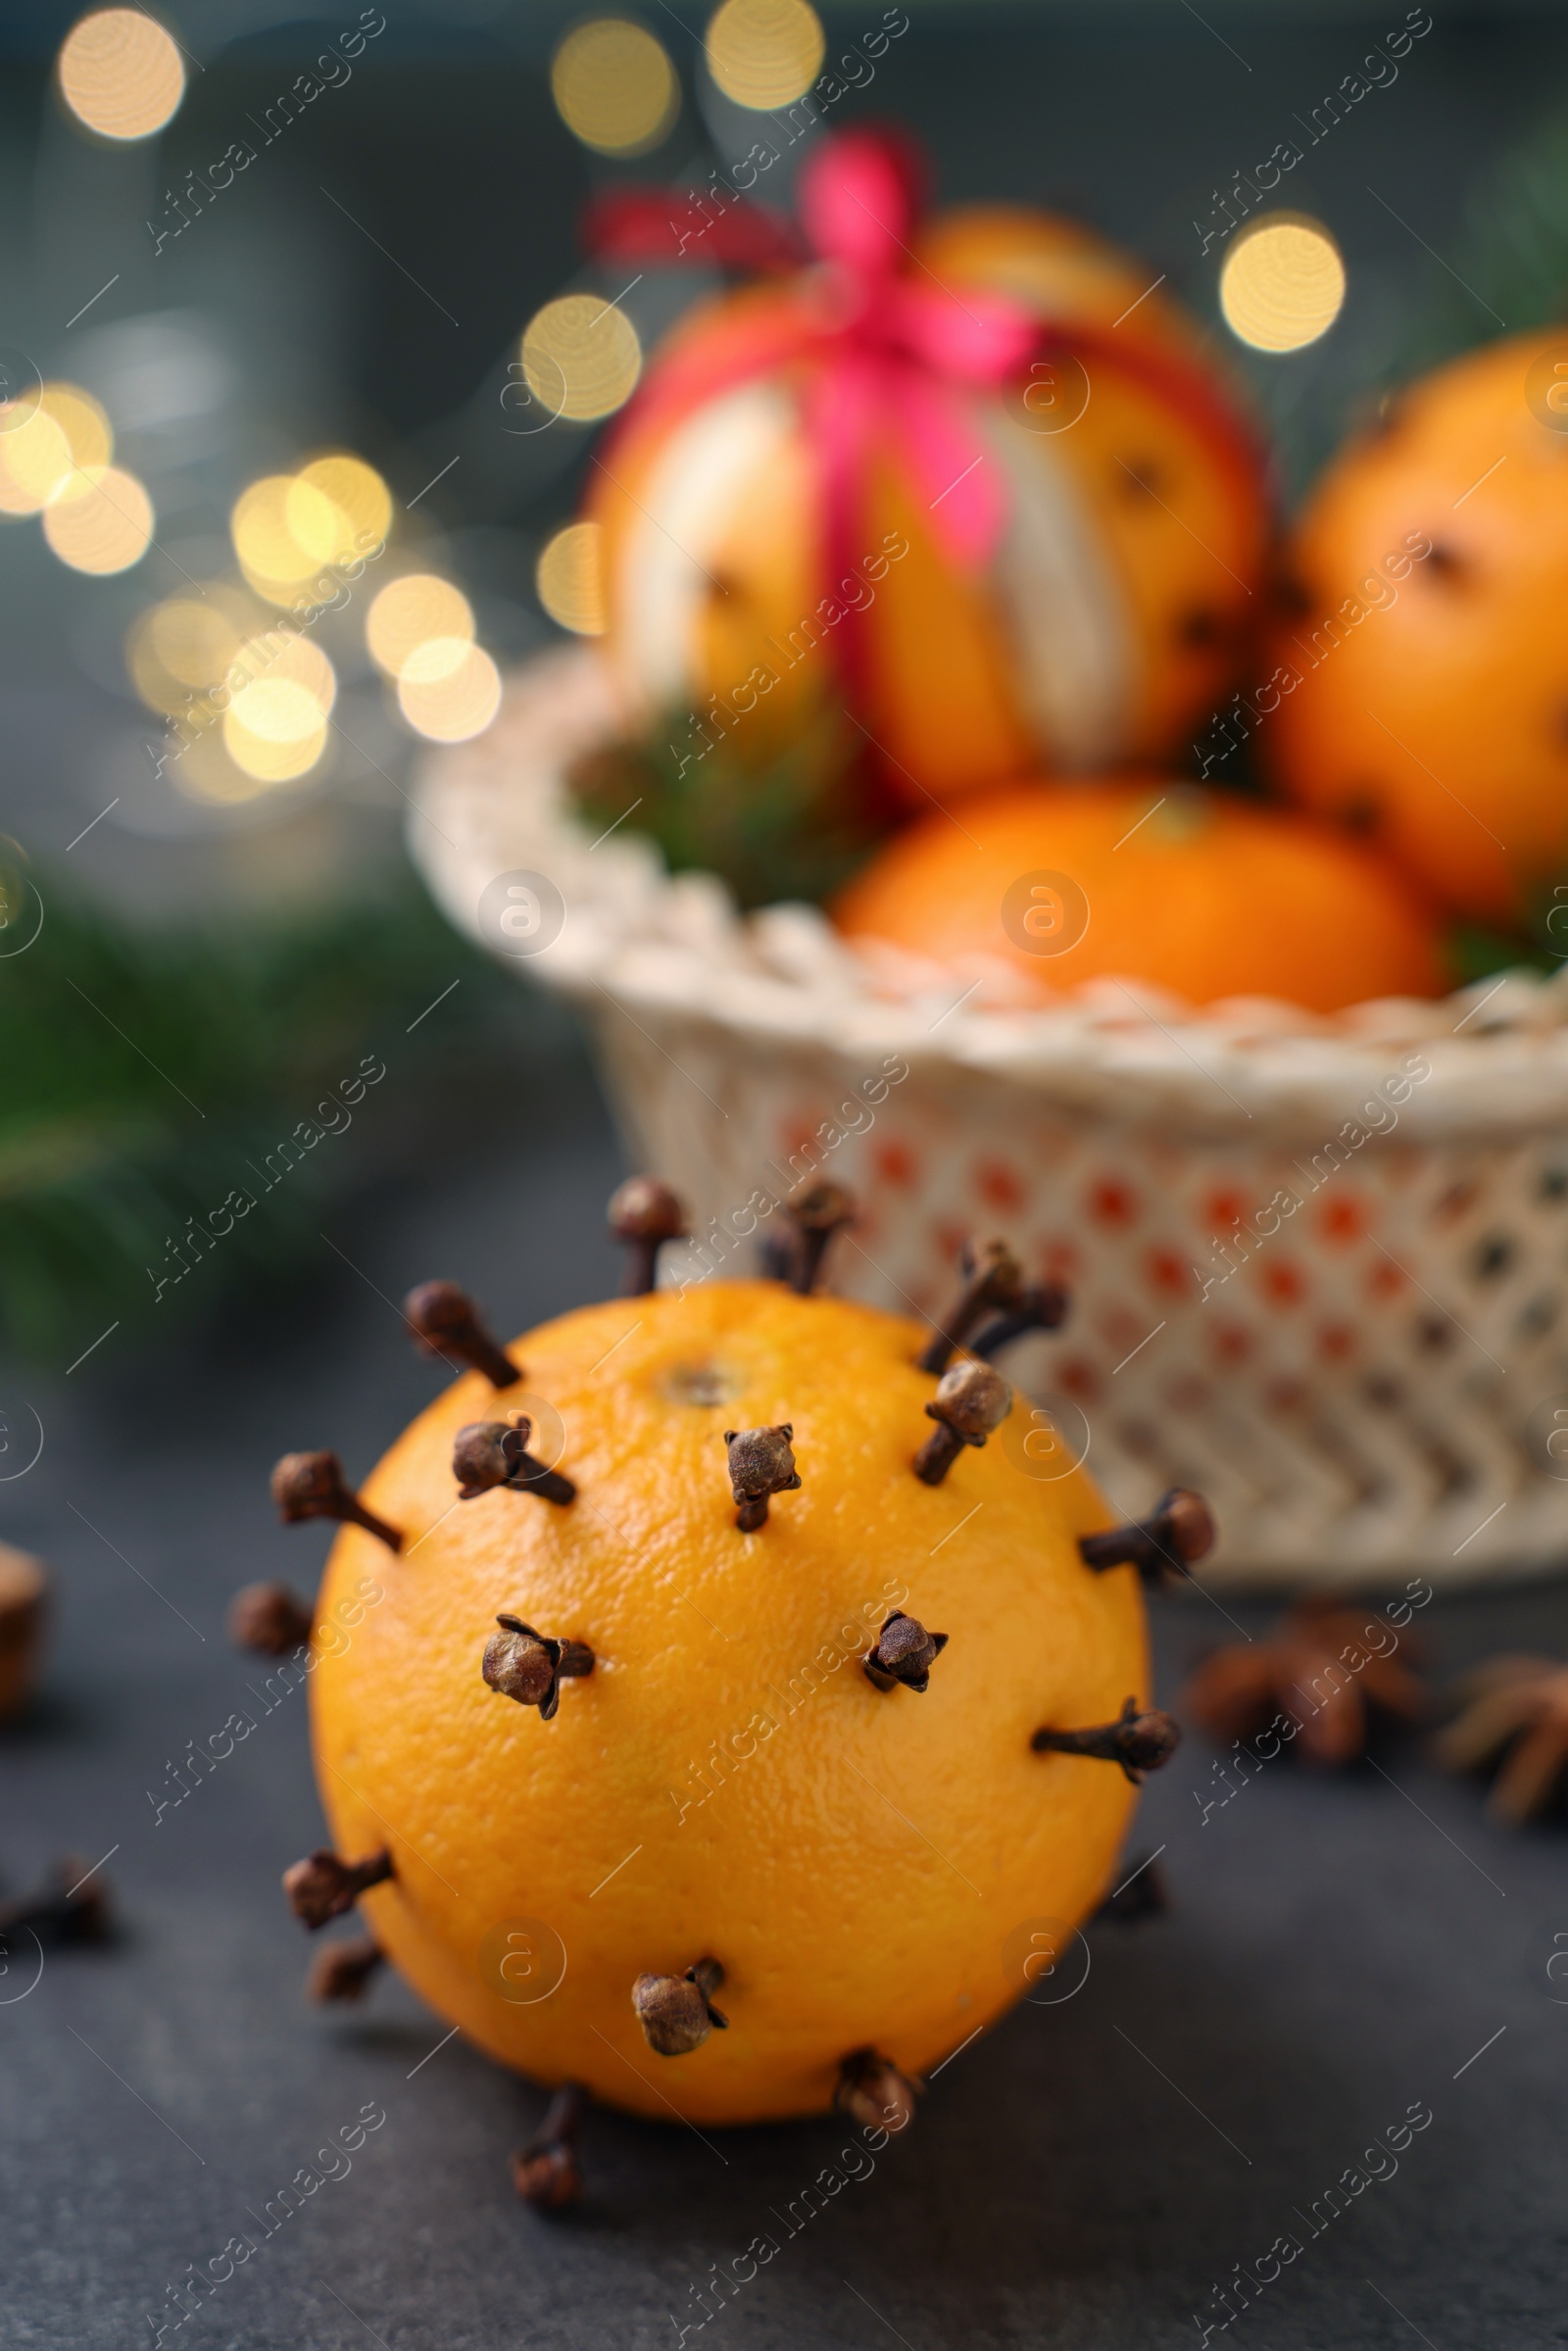 Photo of Pomander balls made of tangerines with cloves on grey table against blurred festive lights